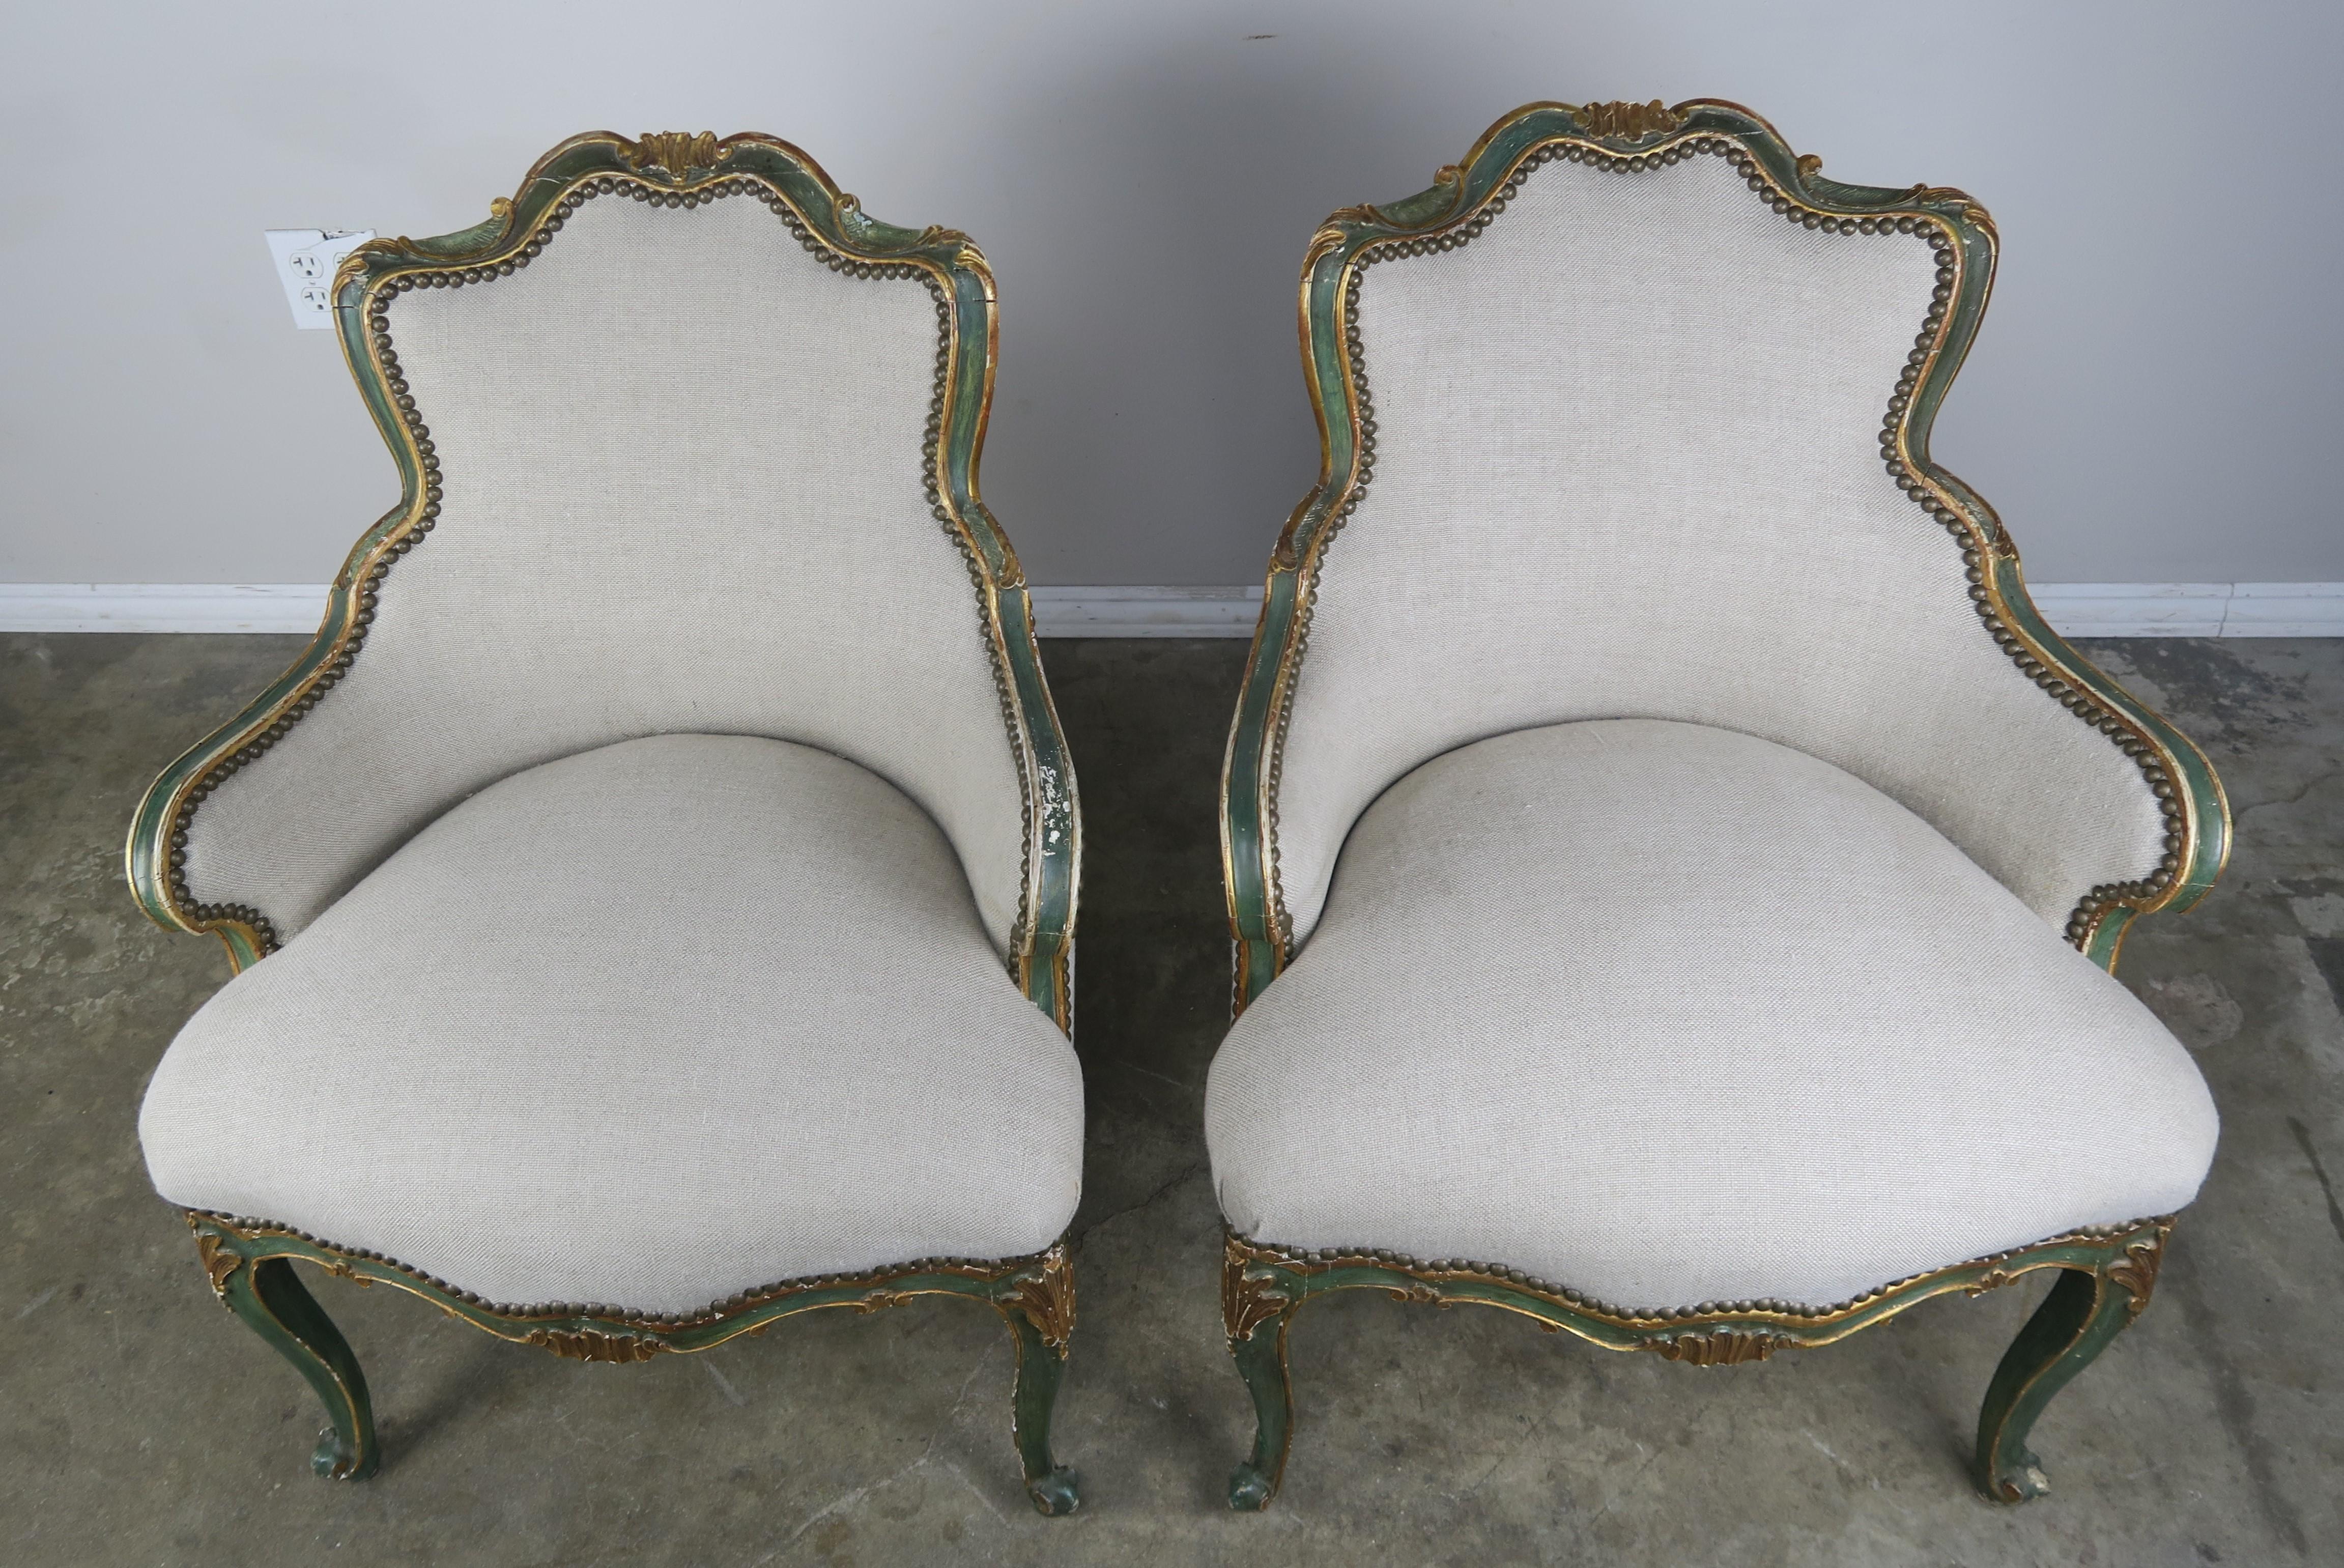 Pair of French painted and parcel gilt accent armchairs with beautifully shaped backs. The chairs Stand on four cabriole legs that end in ram's head feet. The chairs are newly upholstered in a washed Belgium linen with antique brass colored nailhead